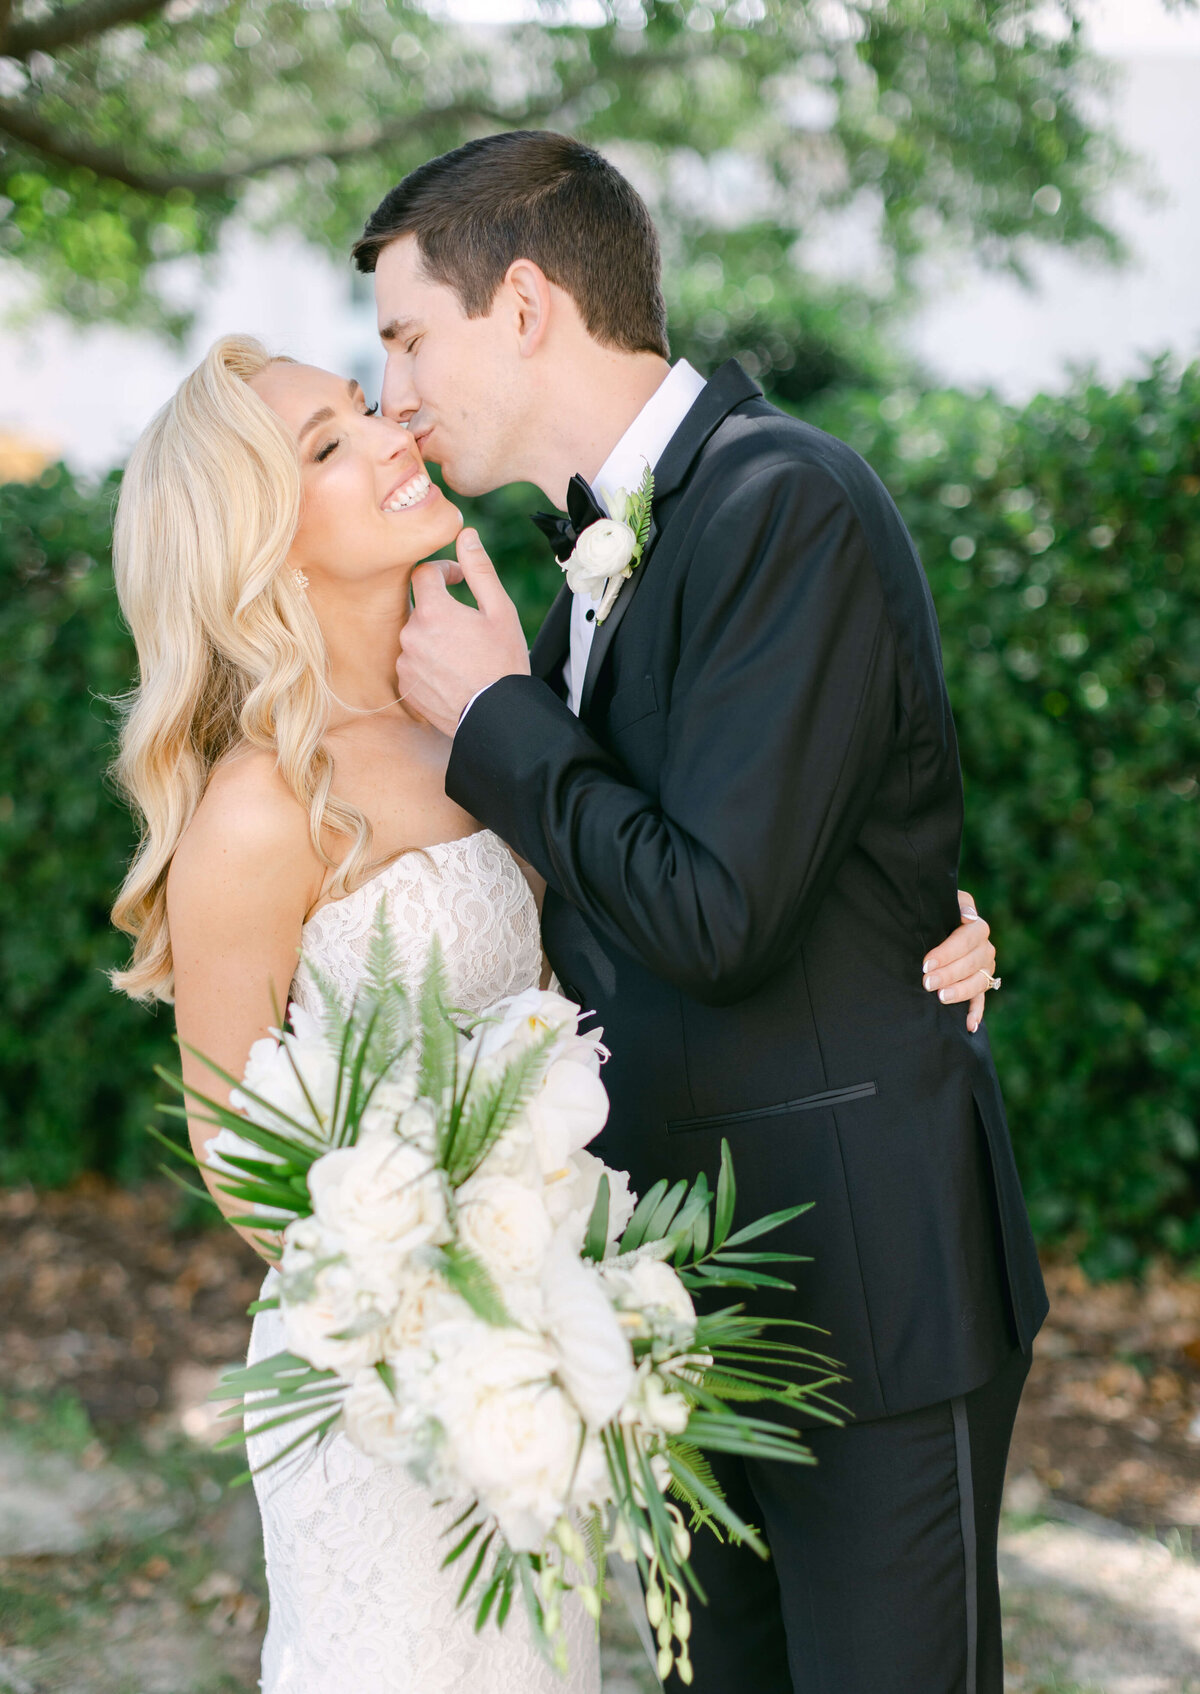 A bride smiles while a groom kisses her on cheek.